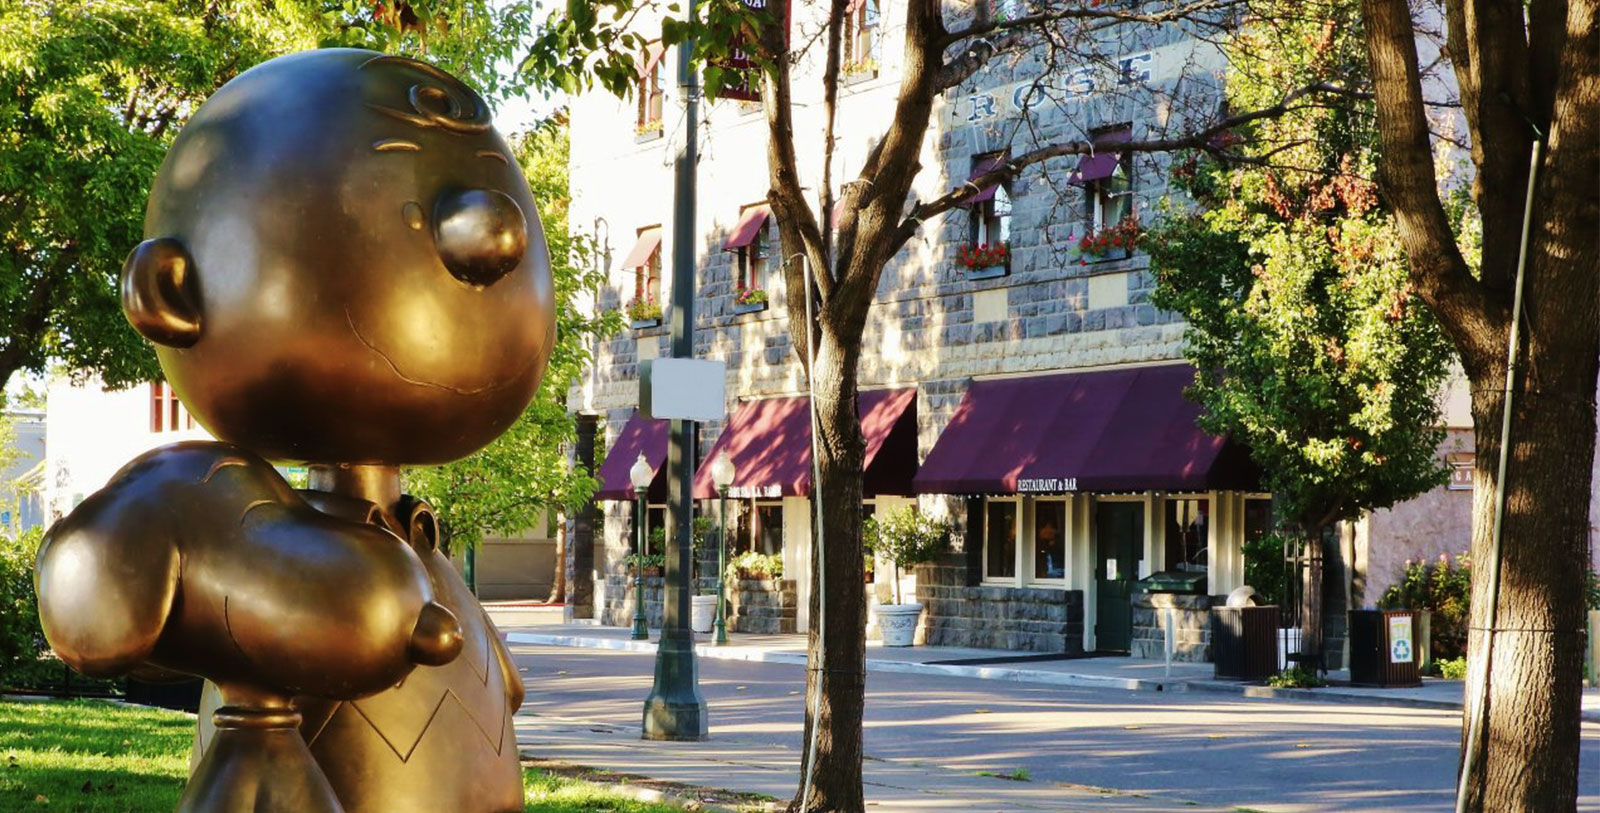 Explore the Historic Railroad Square and spot all the statues of the Peanuts gang, originally created by Santa Rosa citizen Charles M. Schulz.